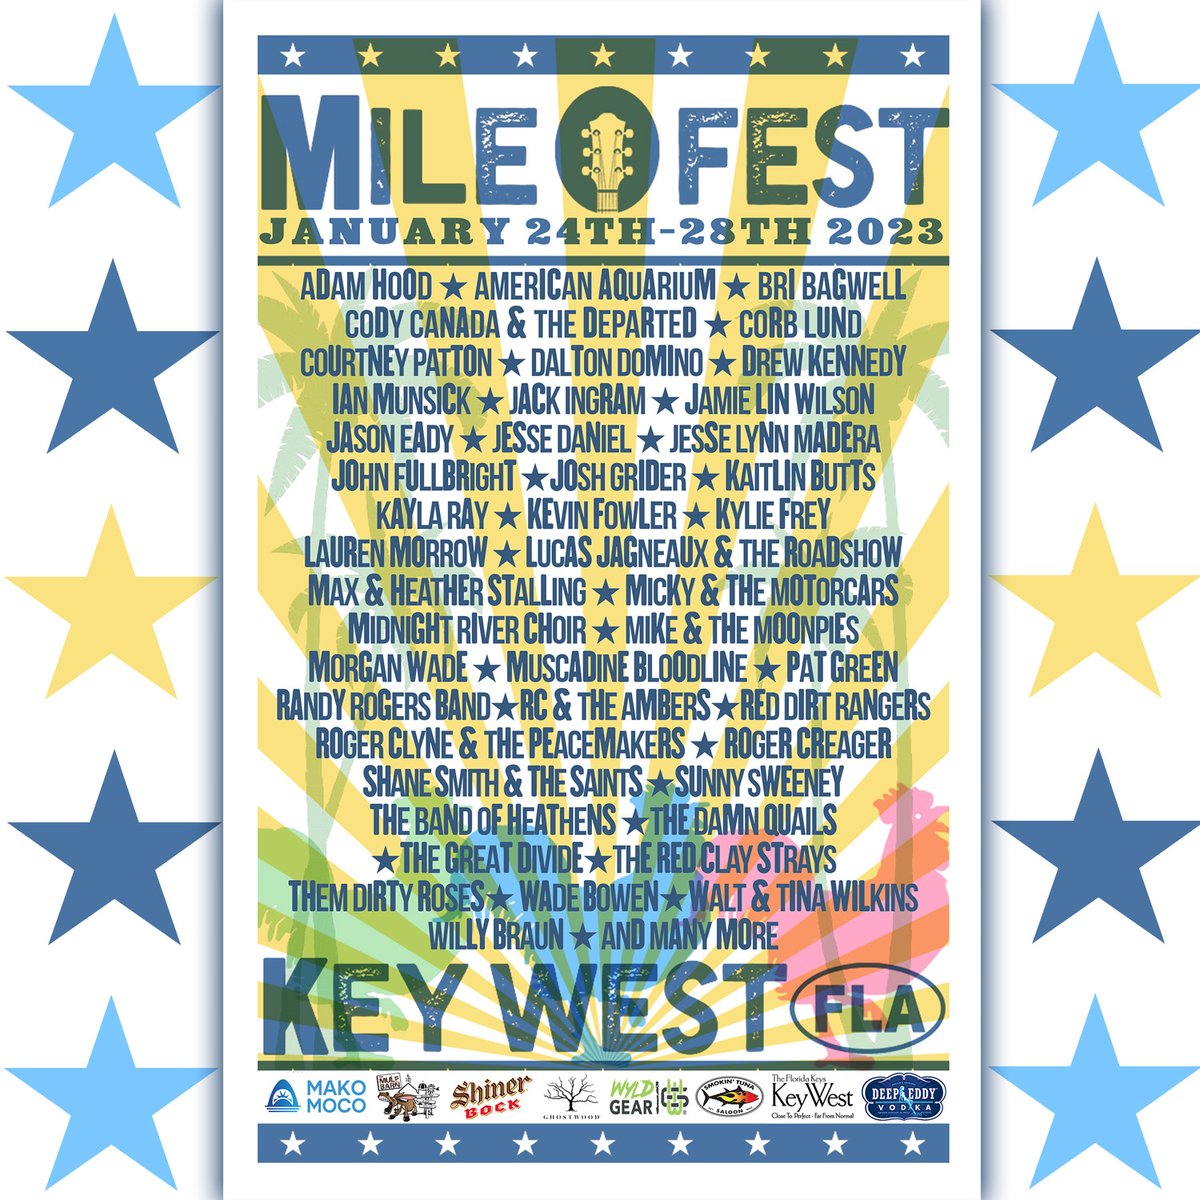 Can't wait to get back to @Mile0Fest Key West in January! mile0fest.com